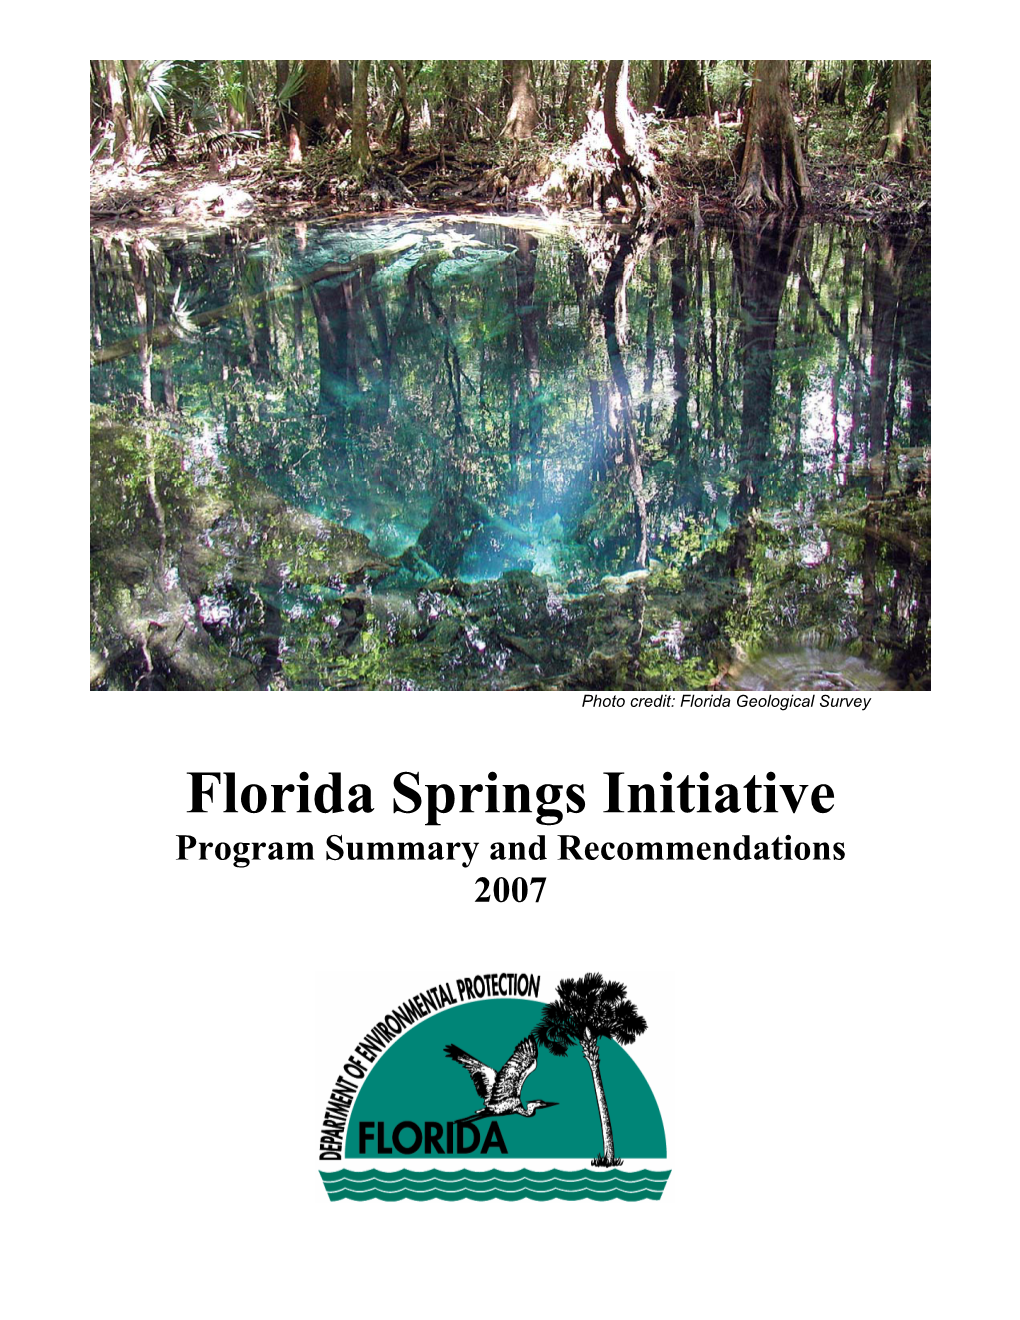 Florida Springs Initiative, Program Summary and Recommendations